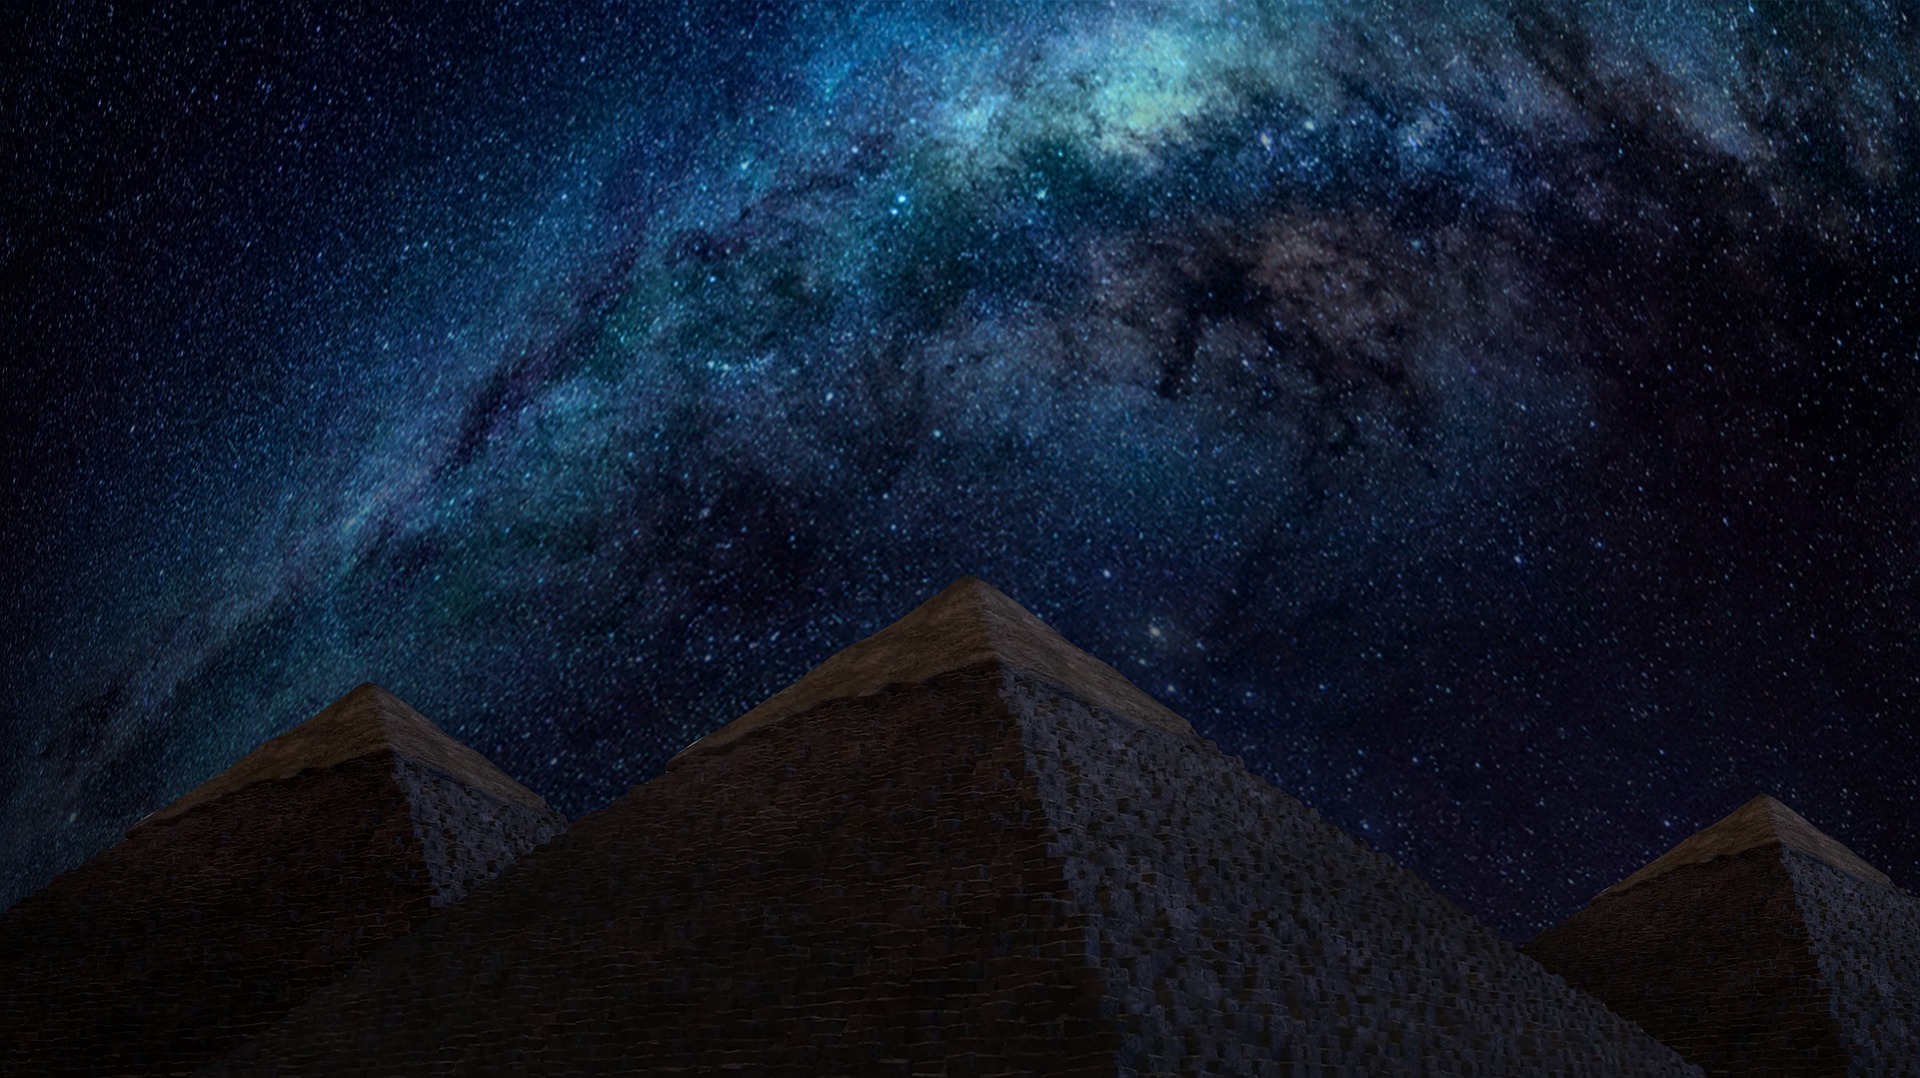 Astrophysicists model the view of the Milky Way from the era of Ancient Egypt